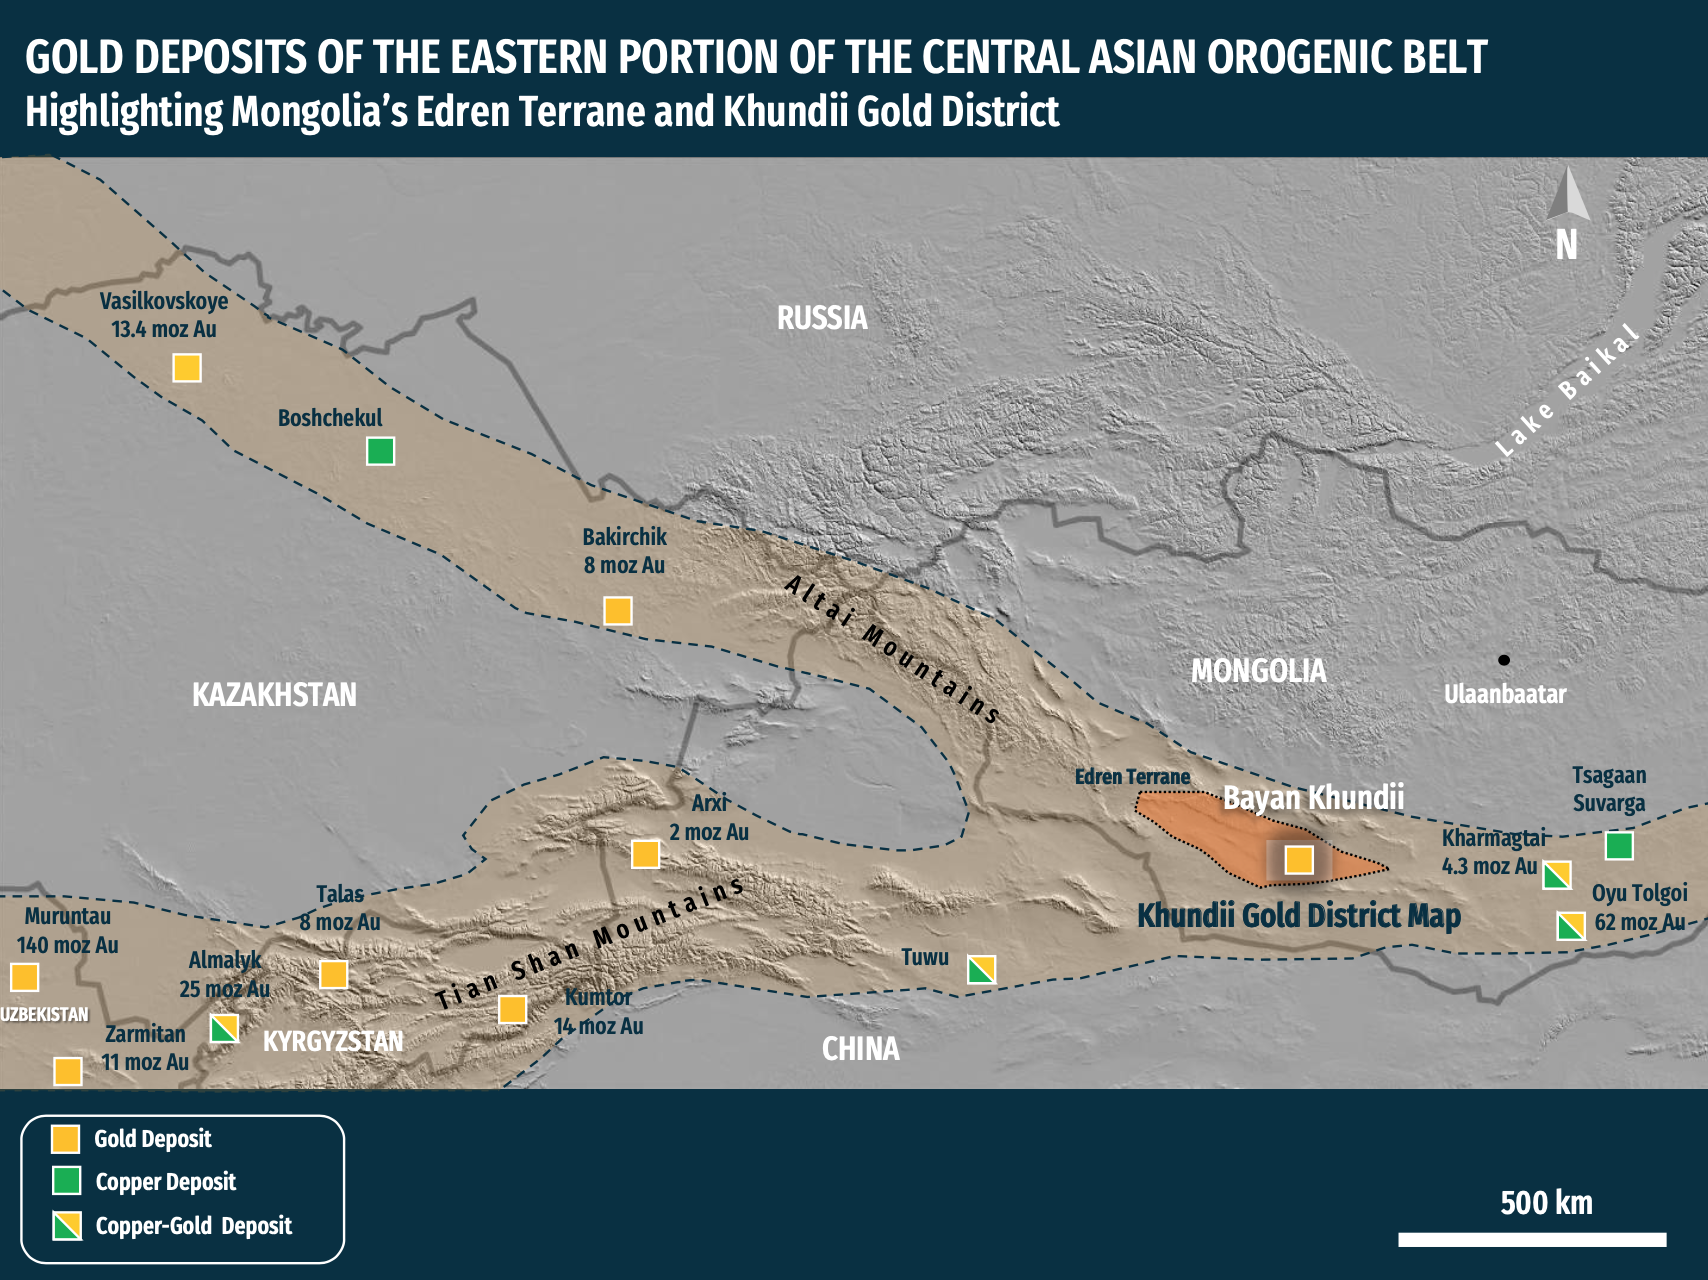 The Altai-Mongolia terrane in the Central Asian Orogenic Belt